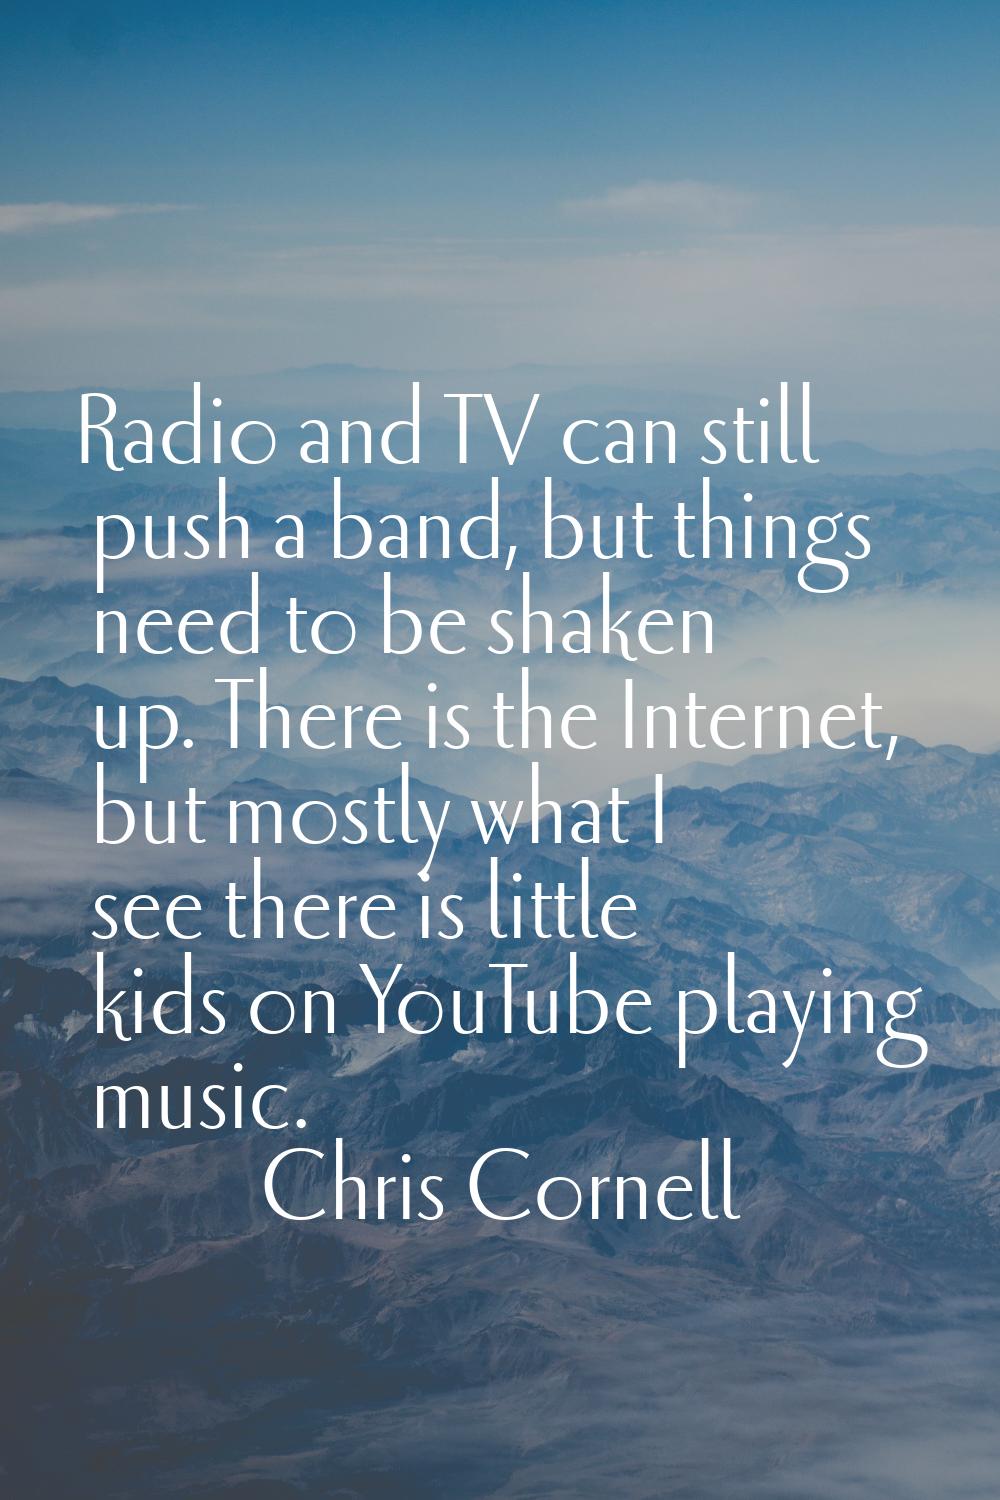 Radio and TV can still push a band, but things need to be shaken up. There is the Internet, but mos